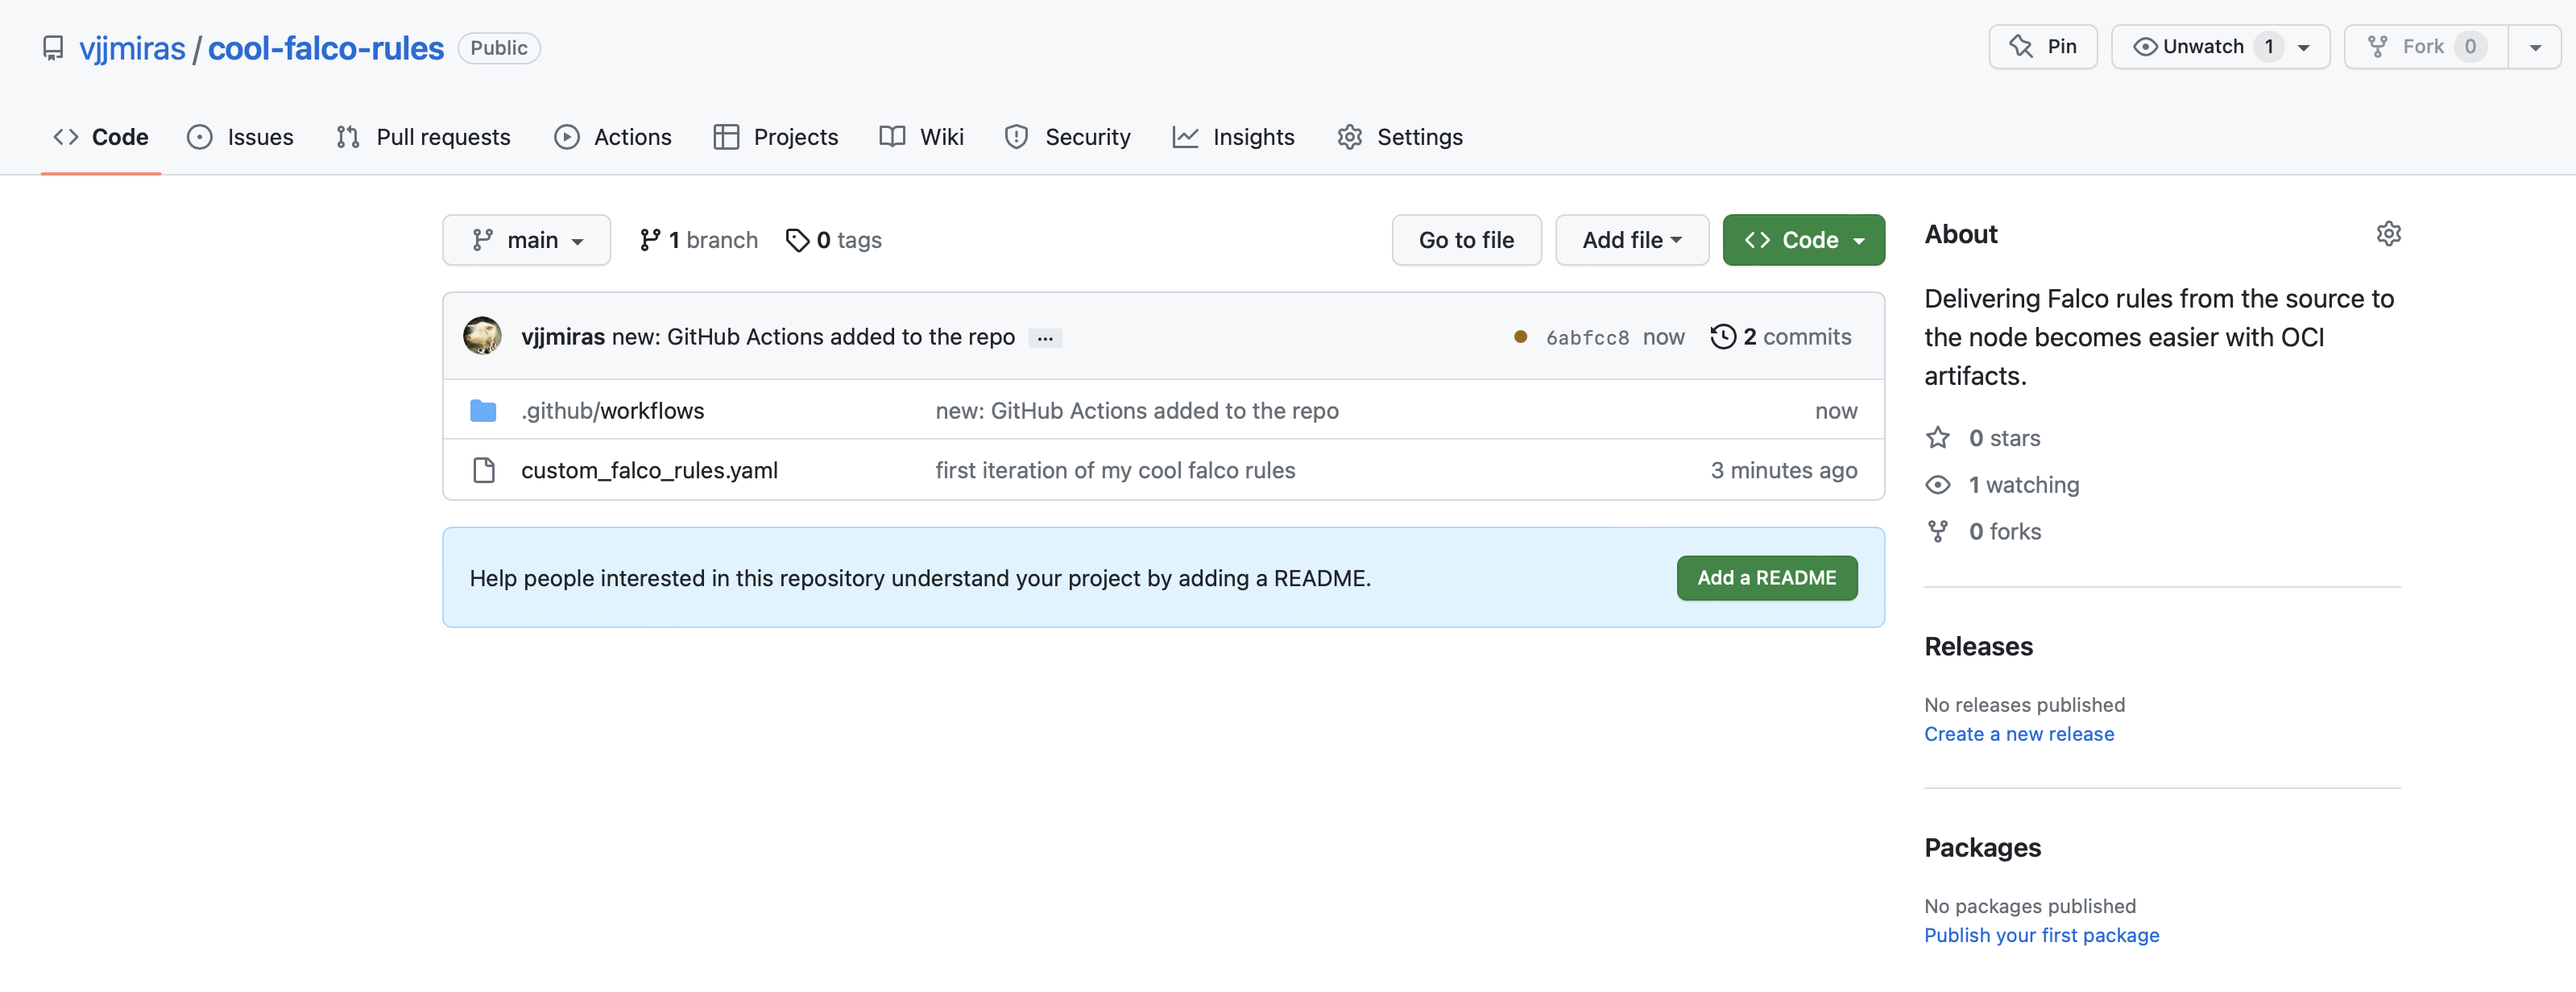 Upload commits to your GitHub repository